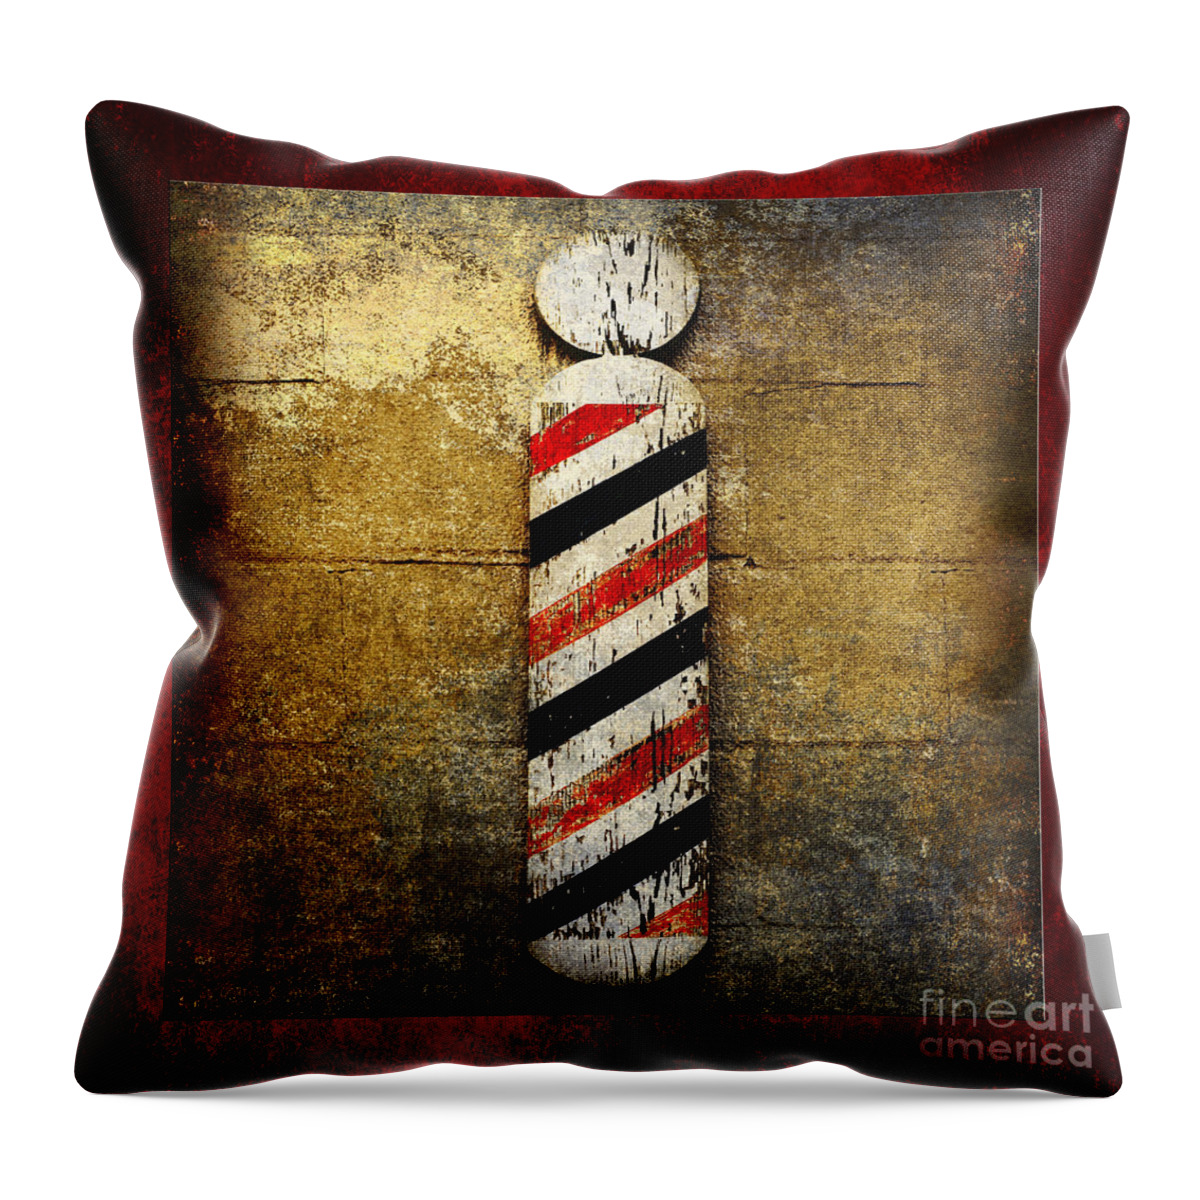 Barber Pole Throw Pillow featuring the photograph Barber Pole Square by Andee Design